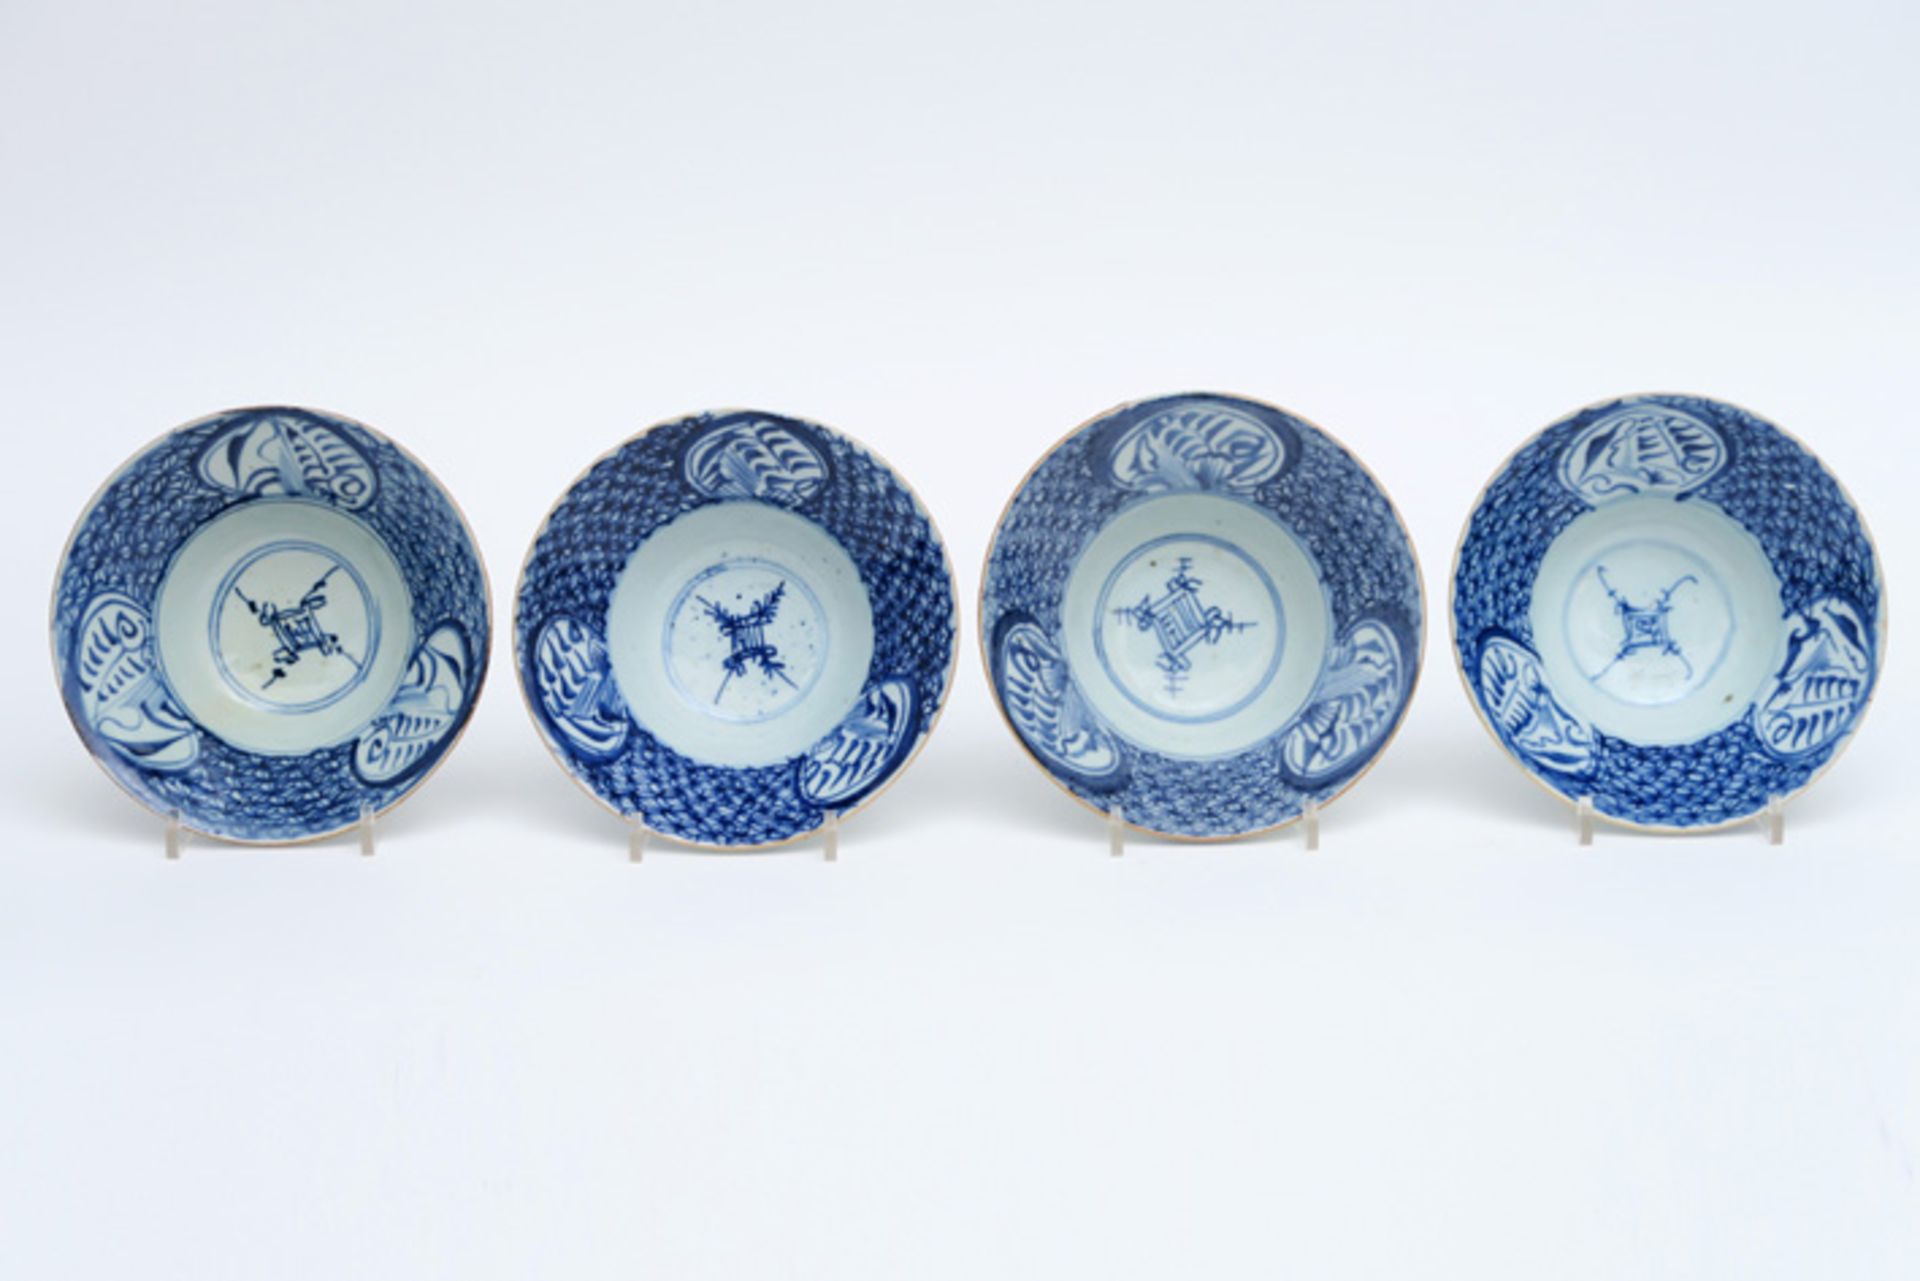 series of four antique Chinese bowls in porcelain with a blue-white decor || Serie van vier